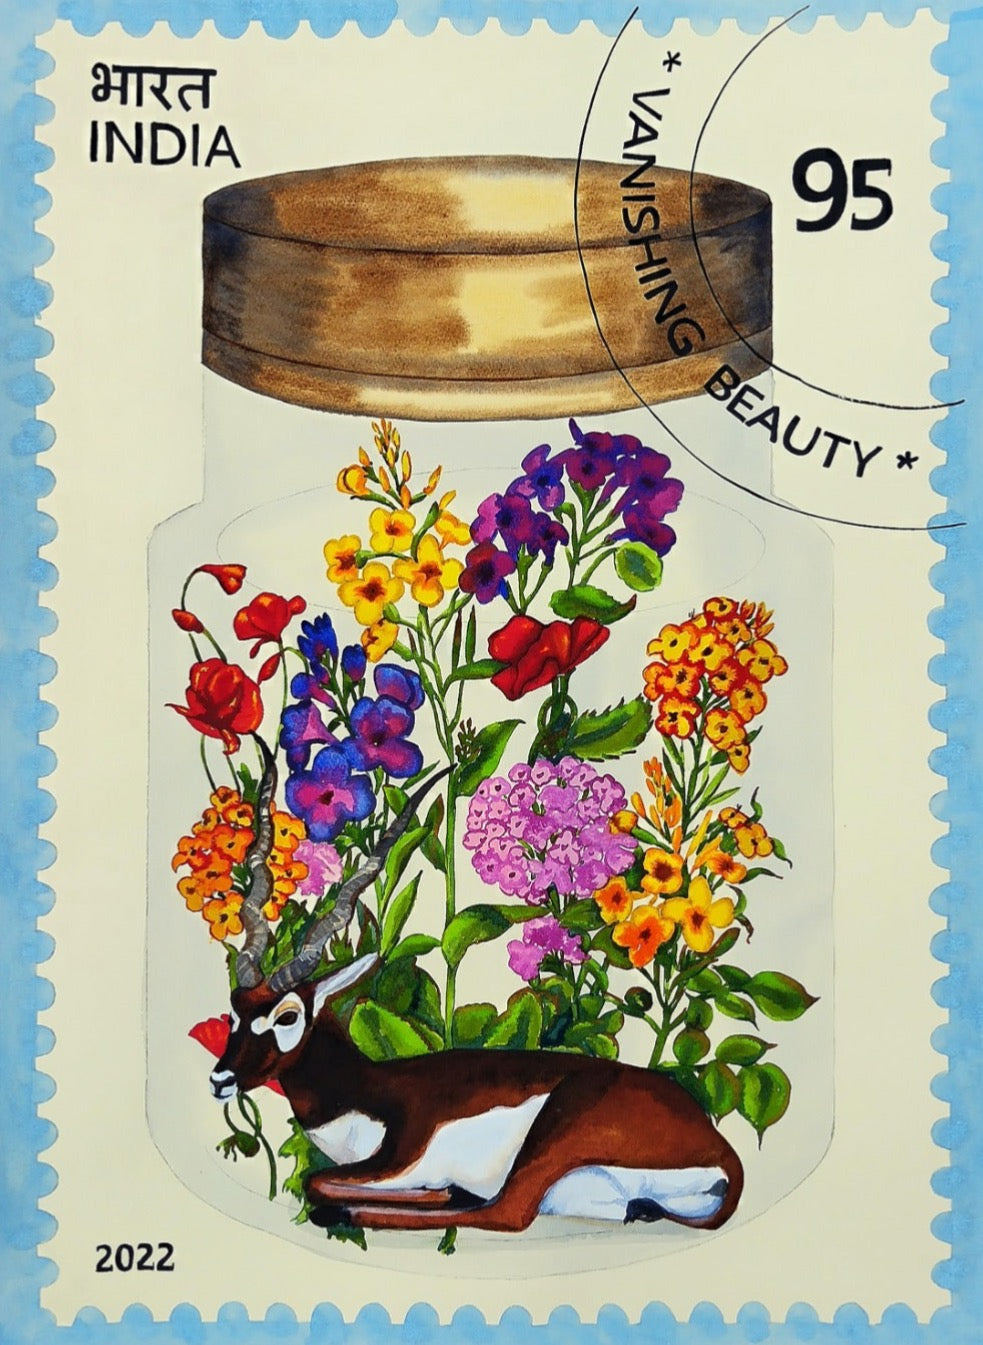 A musing antler sits surrounded by a floral garden in a glass jar. Artist Manisha Agrawal paints a whimsical world using watercolor on paper. Manisha’s signature floral fantasy garden envelopes the subject. 